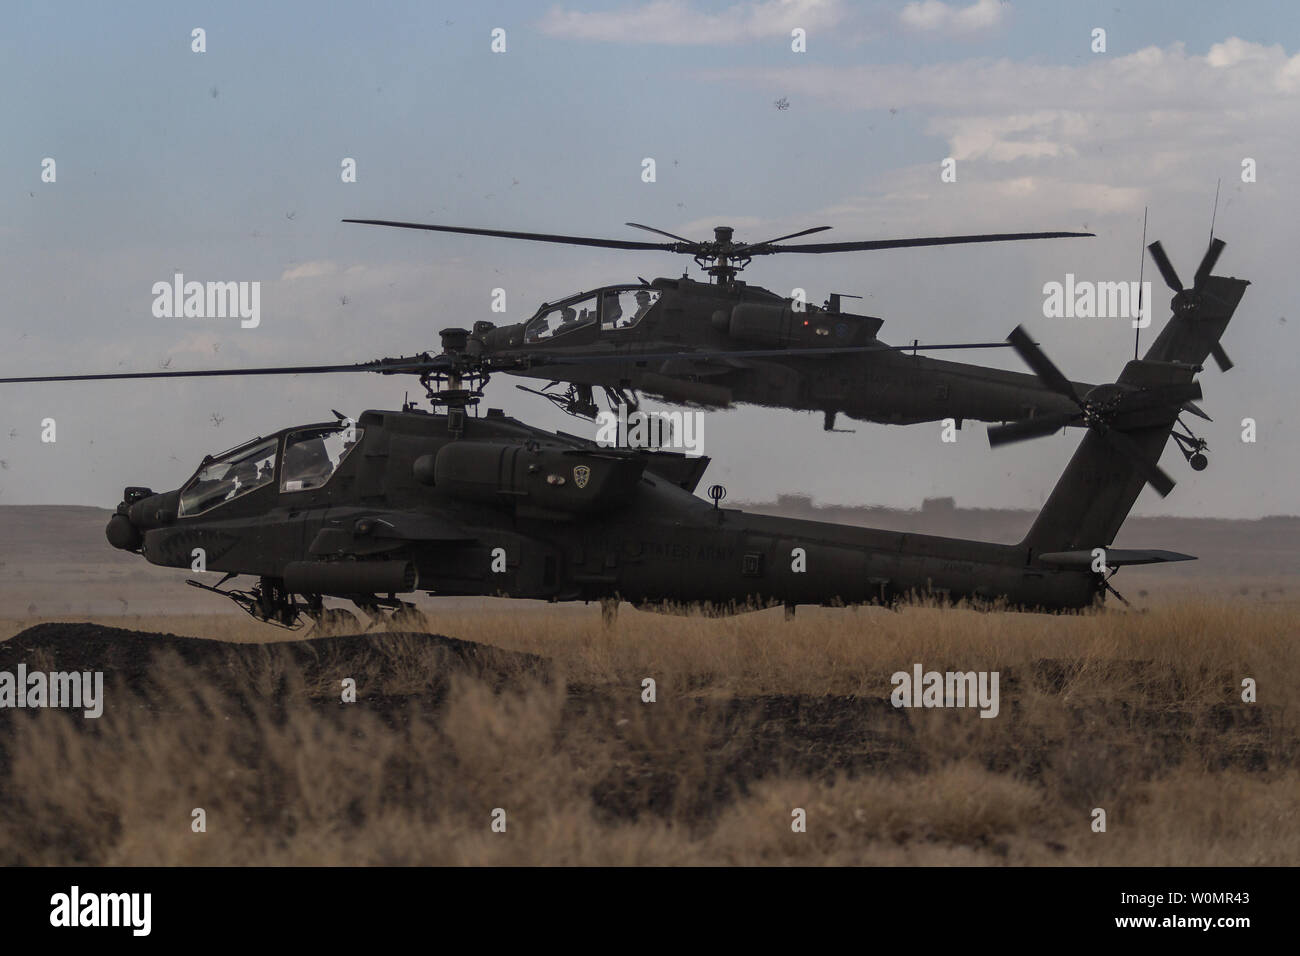 U.S. Army AH-64E Apache helicopter pilots assigned to 1st Battalion, 229th Aviation Regiment, 16th Combat Aviation Brigade, 7th Infantry Division, land at Orchard Combat Training Center, Idaho, September 29, 2016. The aircraft will be part of Raptor Fury, a month-long exercise to validate 16th CAB's mission readiness with the support of nearly 1,500 7th ID Soldiers. Photo by Brian Harris/U.S. Army/UPI Stock Photo